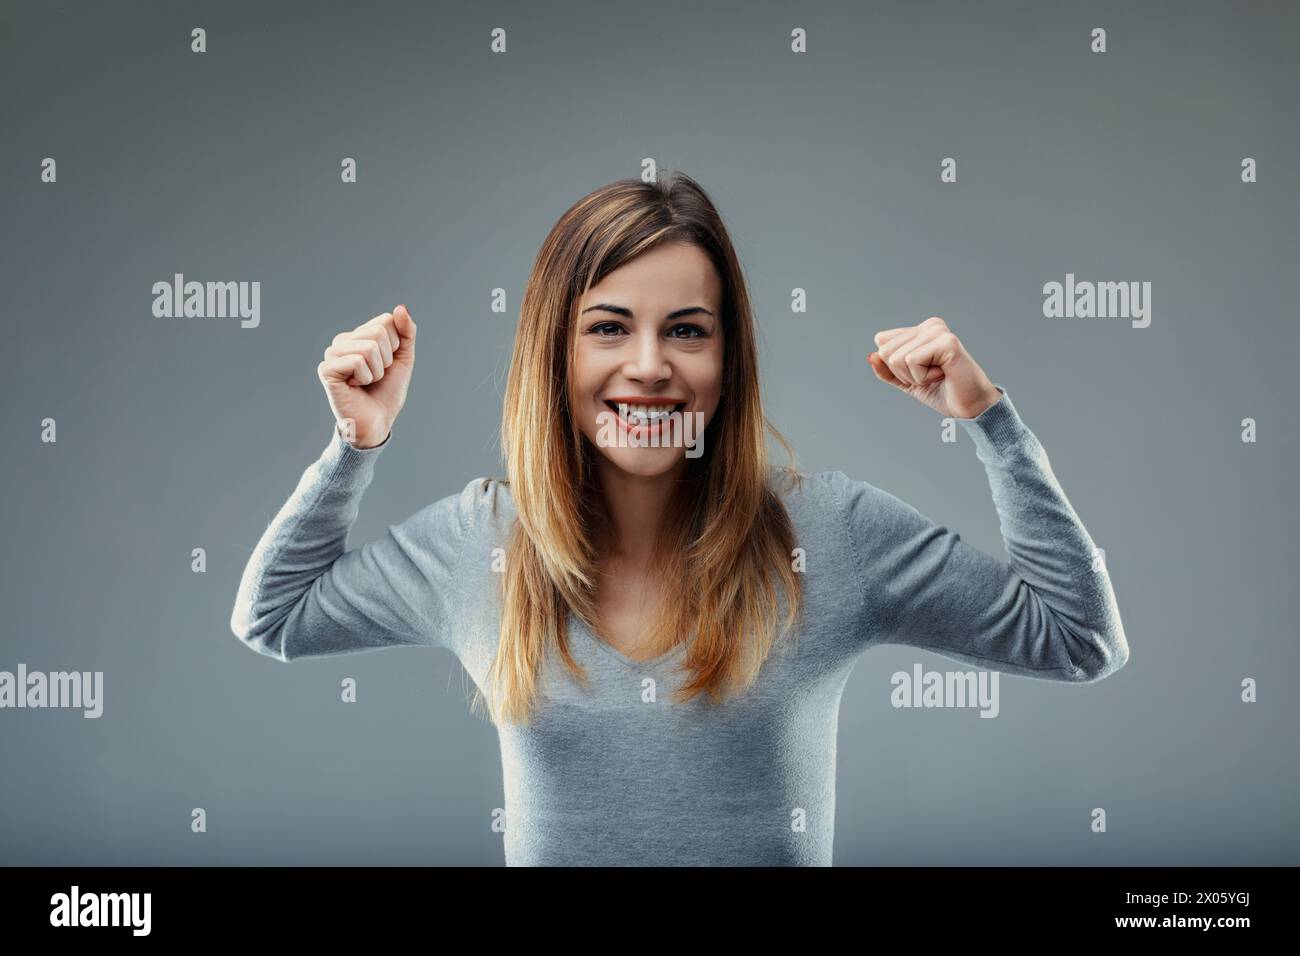 Gleeful expression paired with a victor's pose defines the lady's exultant state in grey Stock Photo